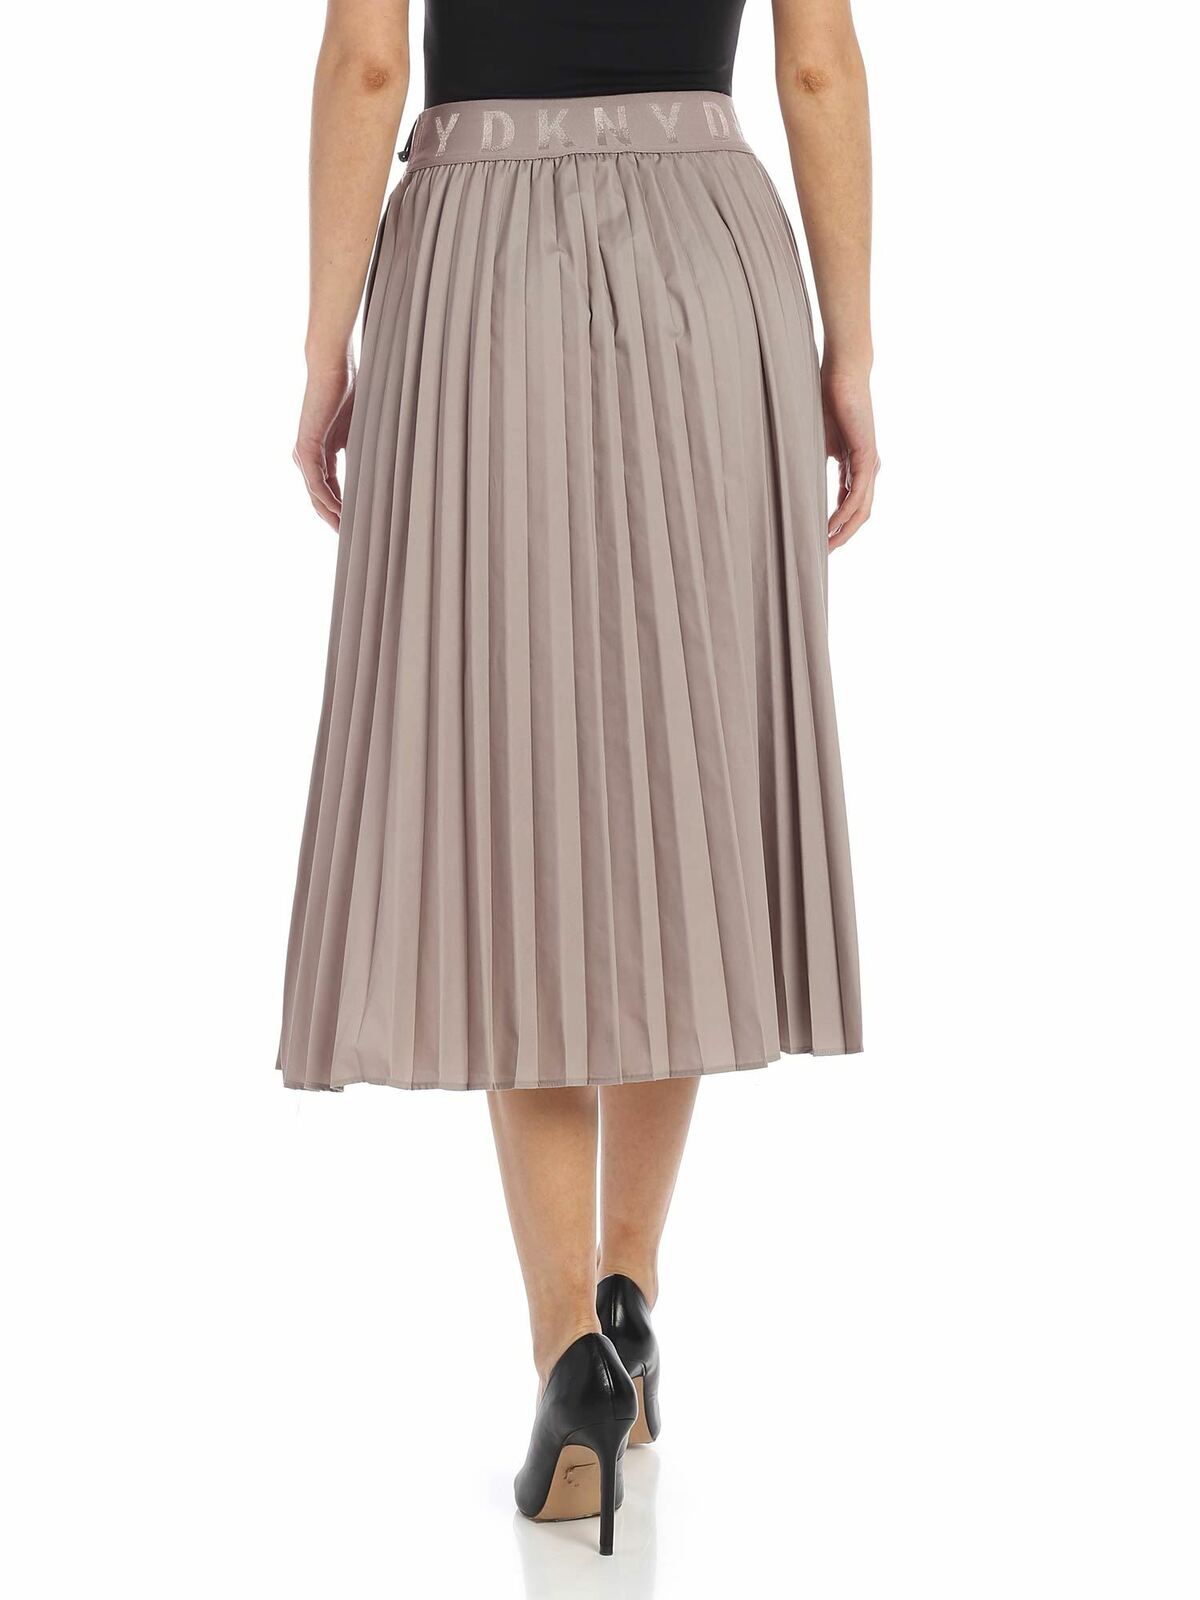 Shop Dkny Pleated Skirt In Taupe Color With Branded Ela In Brown